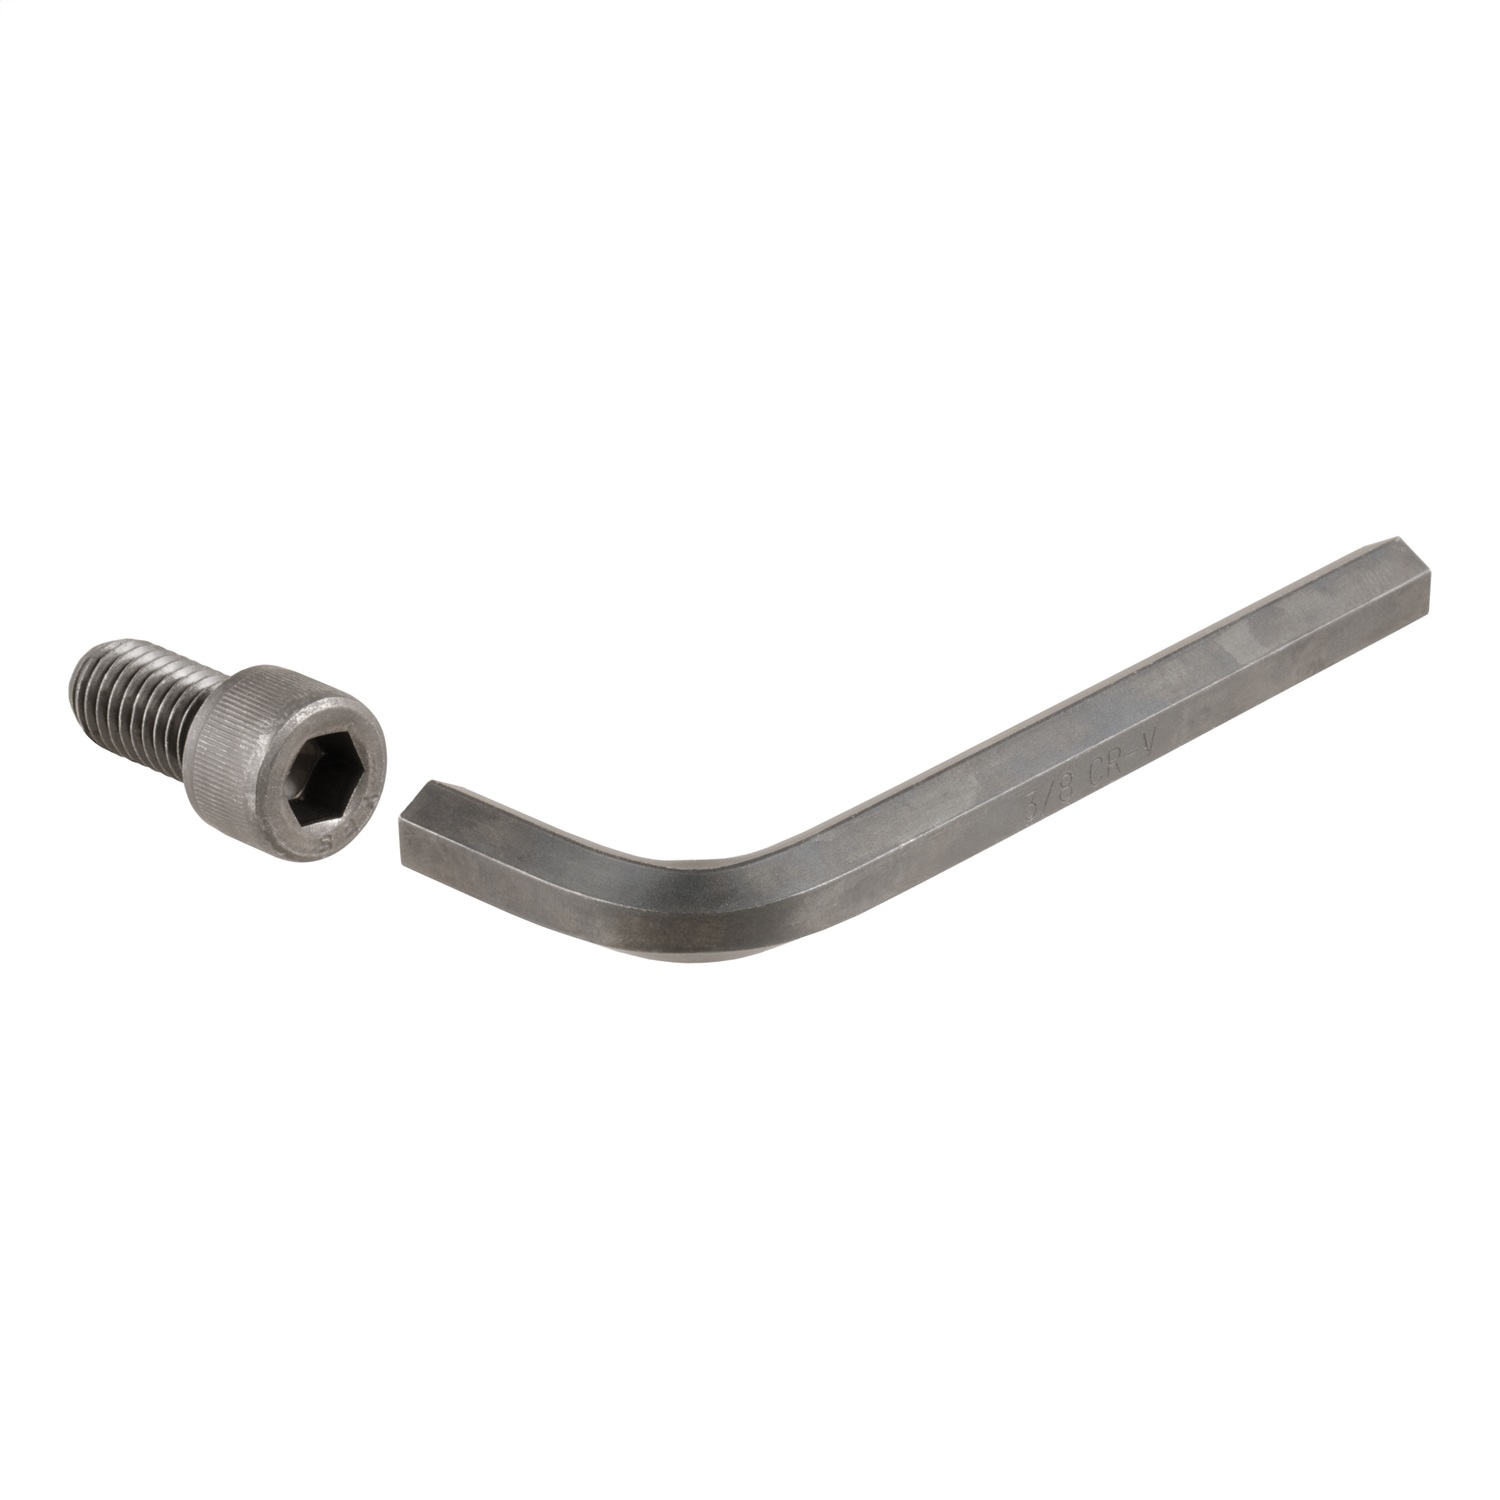 CURT Manufacturing CURT Manufacturing 45916 Anti-Rattle Ball Wrench And Screw  Fits